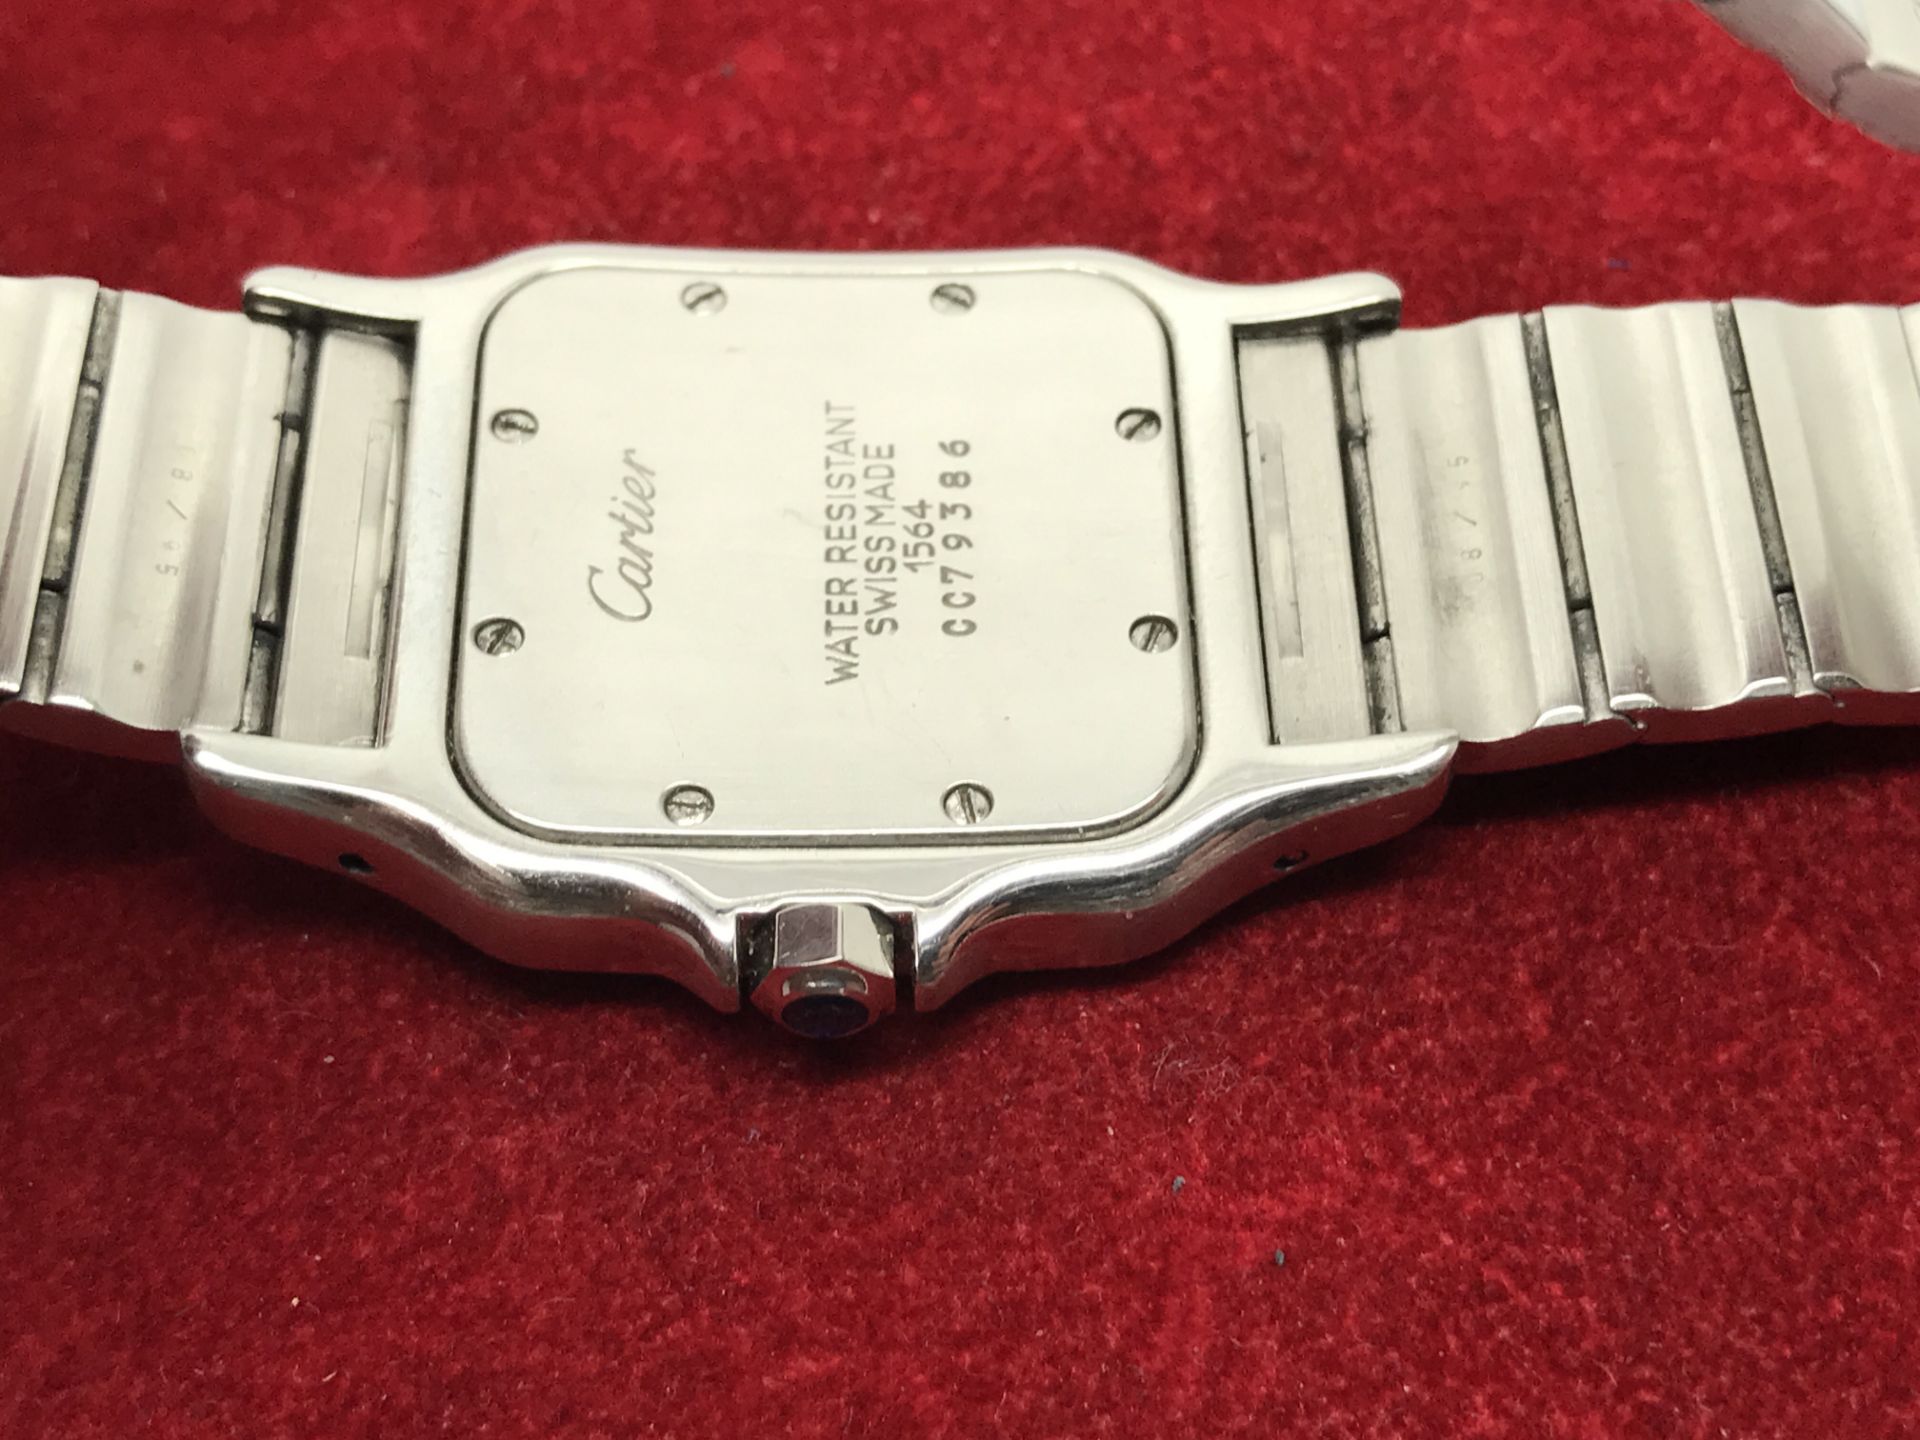 GENTS CARTIER SANTOS WATCH STAINLESS STEEL 1564 - Image 3 of 4